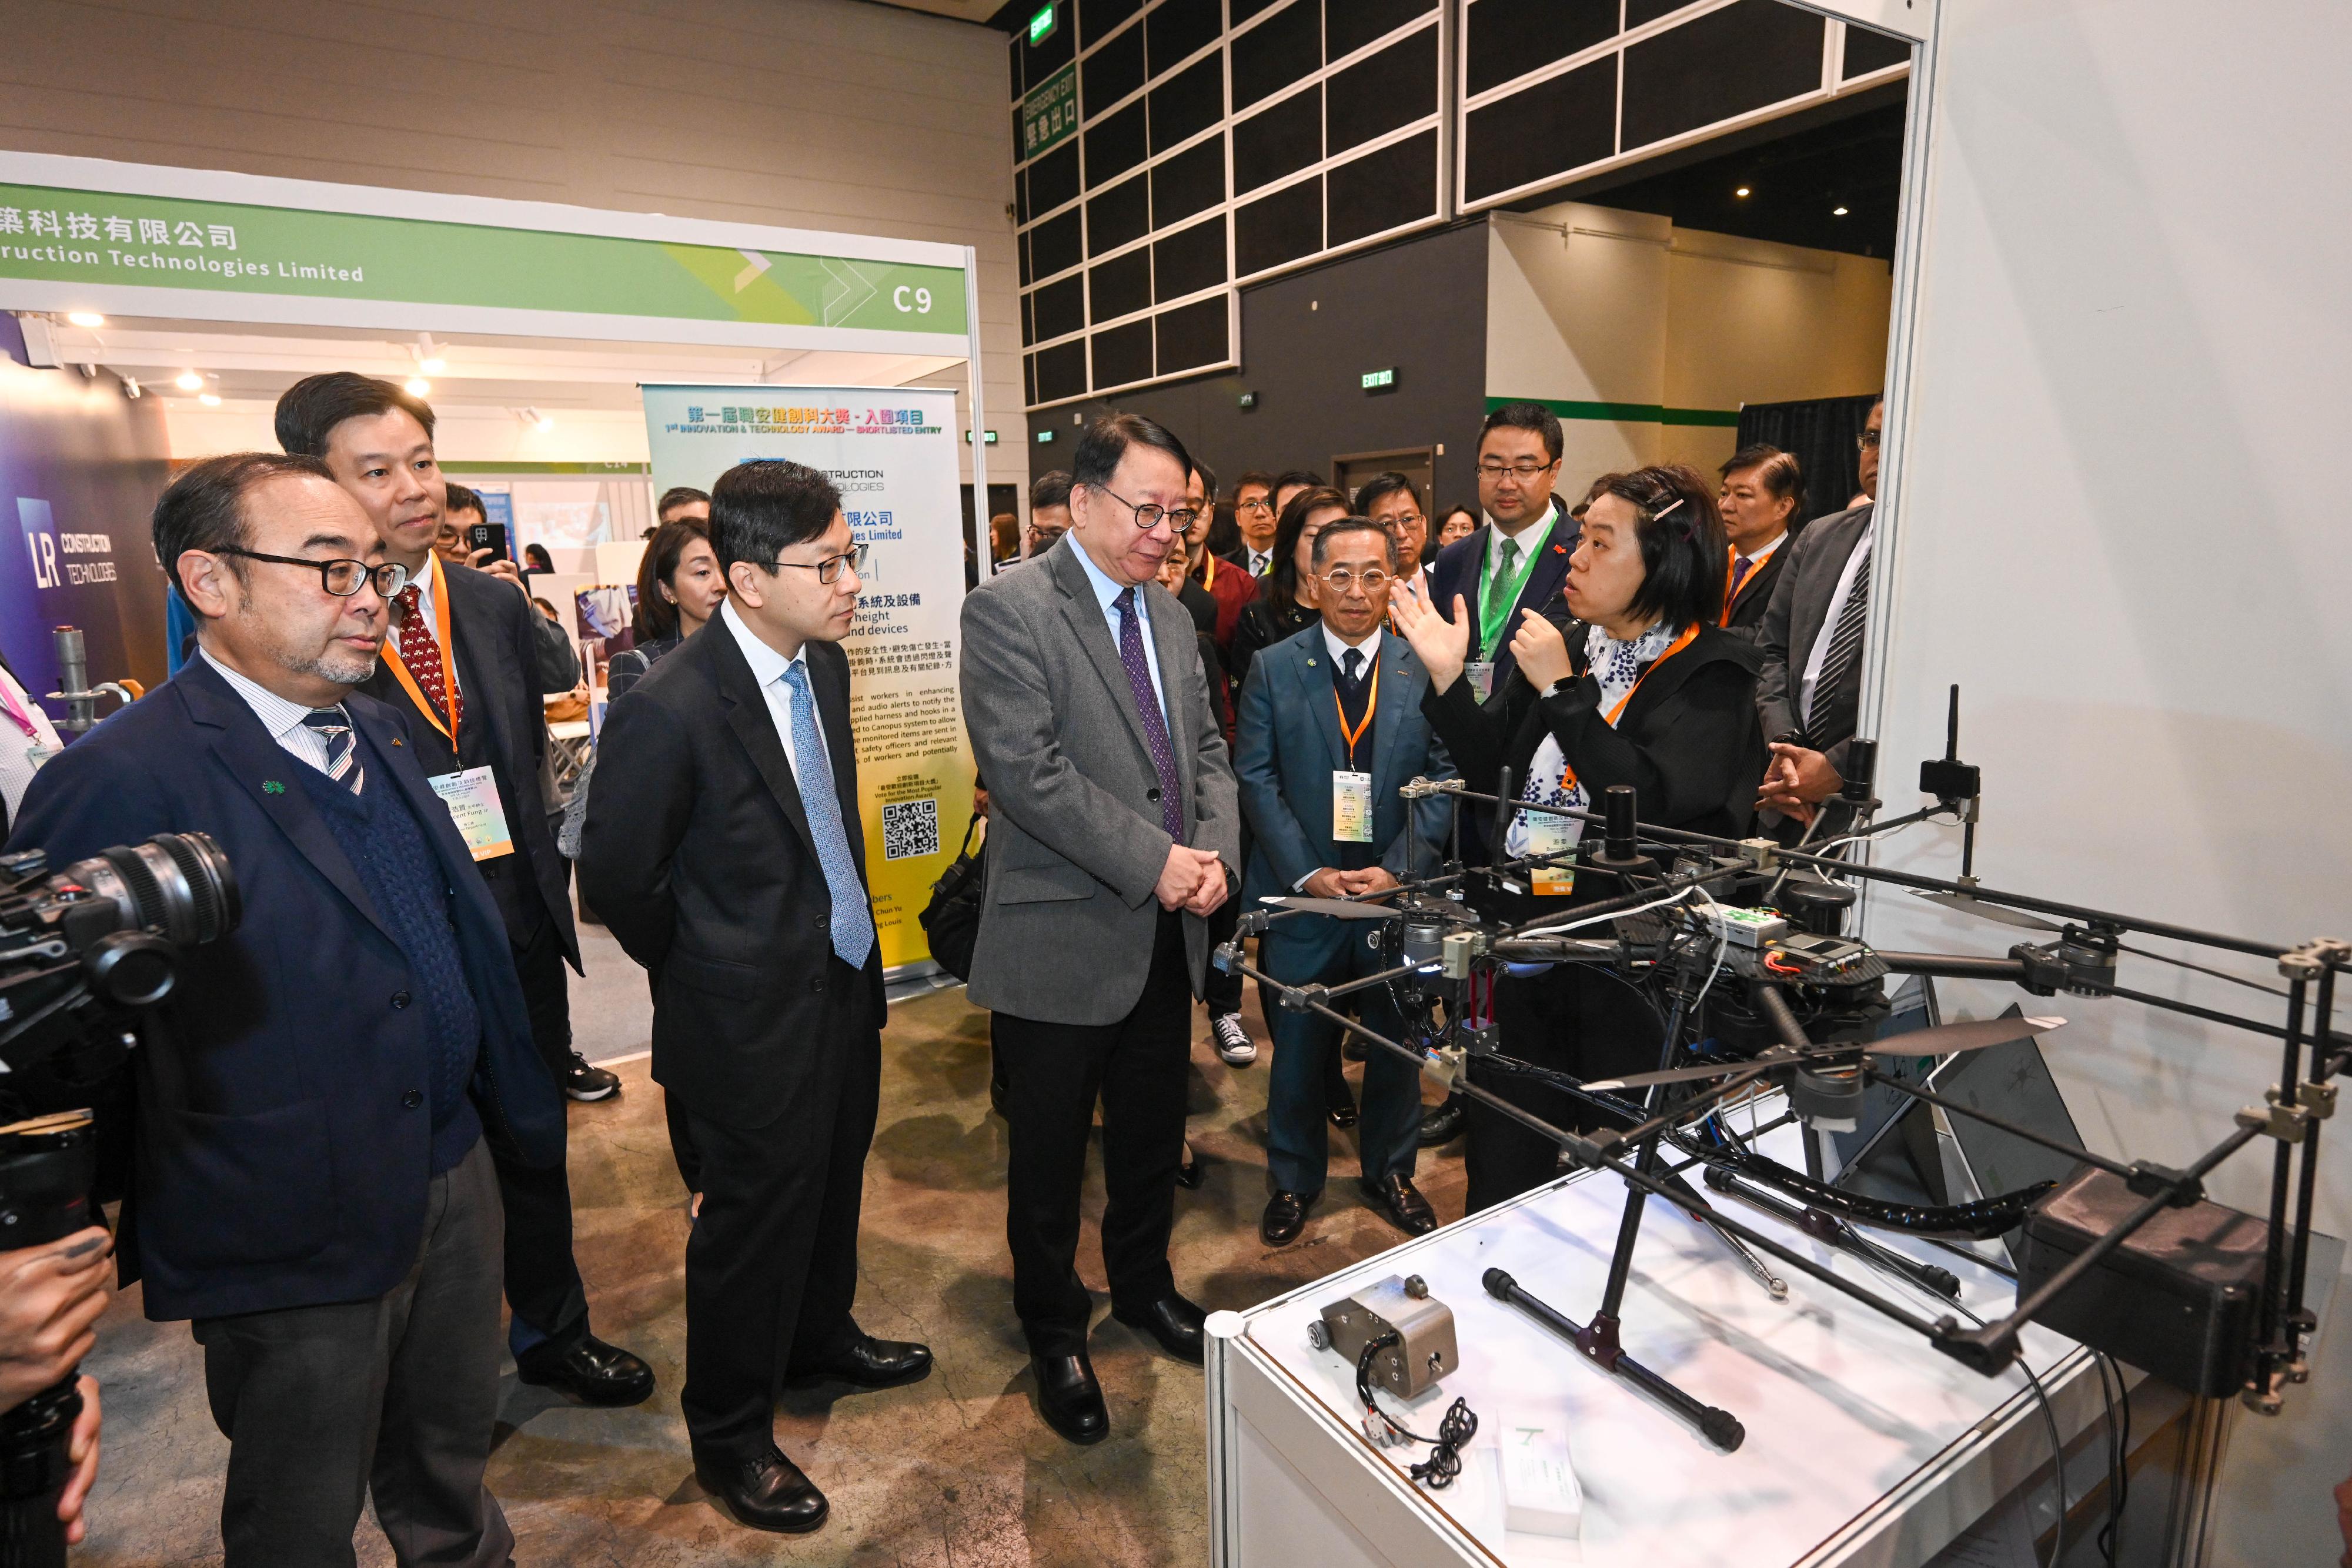 The Chief Secretary for Administration, Mr Chan Kwok-ki, attended the opening ceremony of the OSH Innovation & Technology Expo today (March 7). Photo shows Mr Chan (front row, third left) touring the exhibition.

